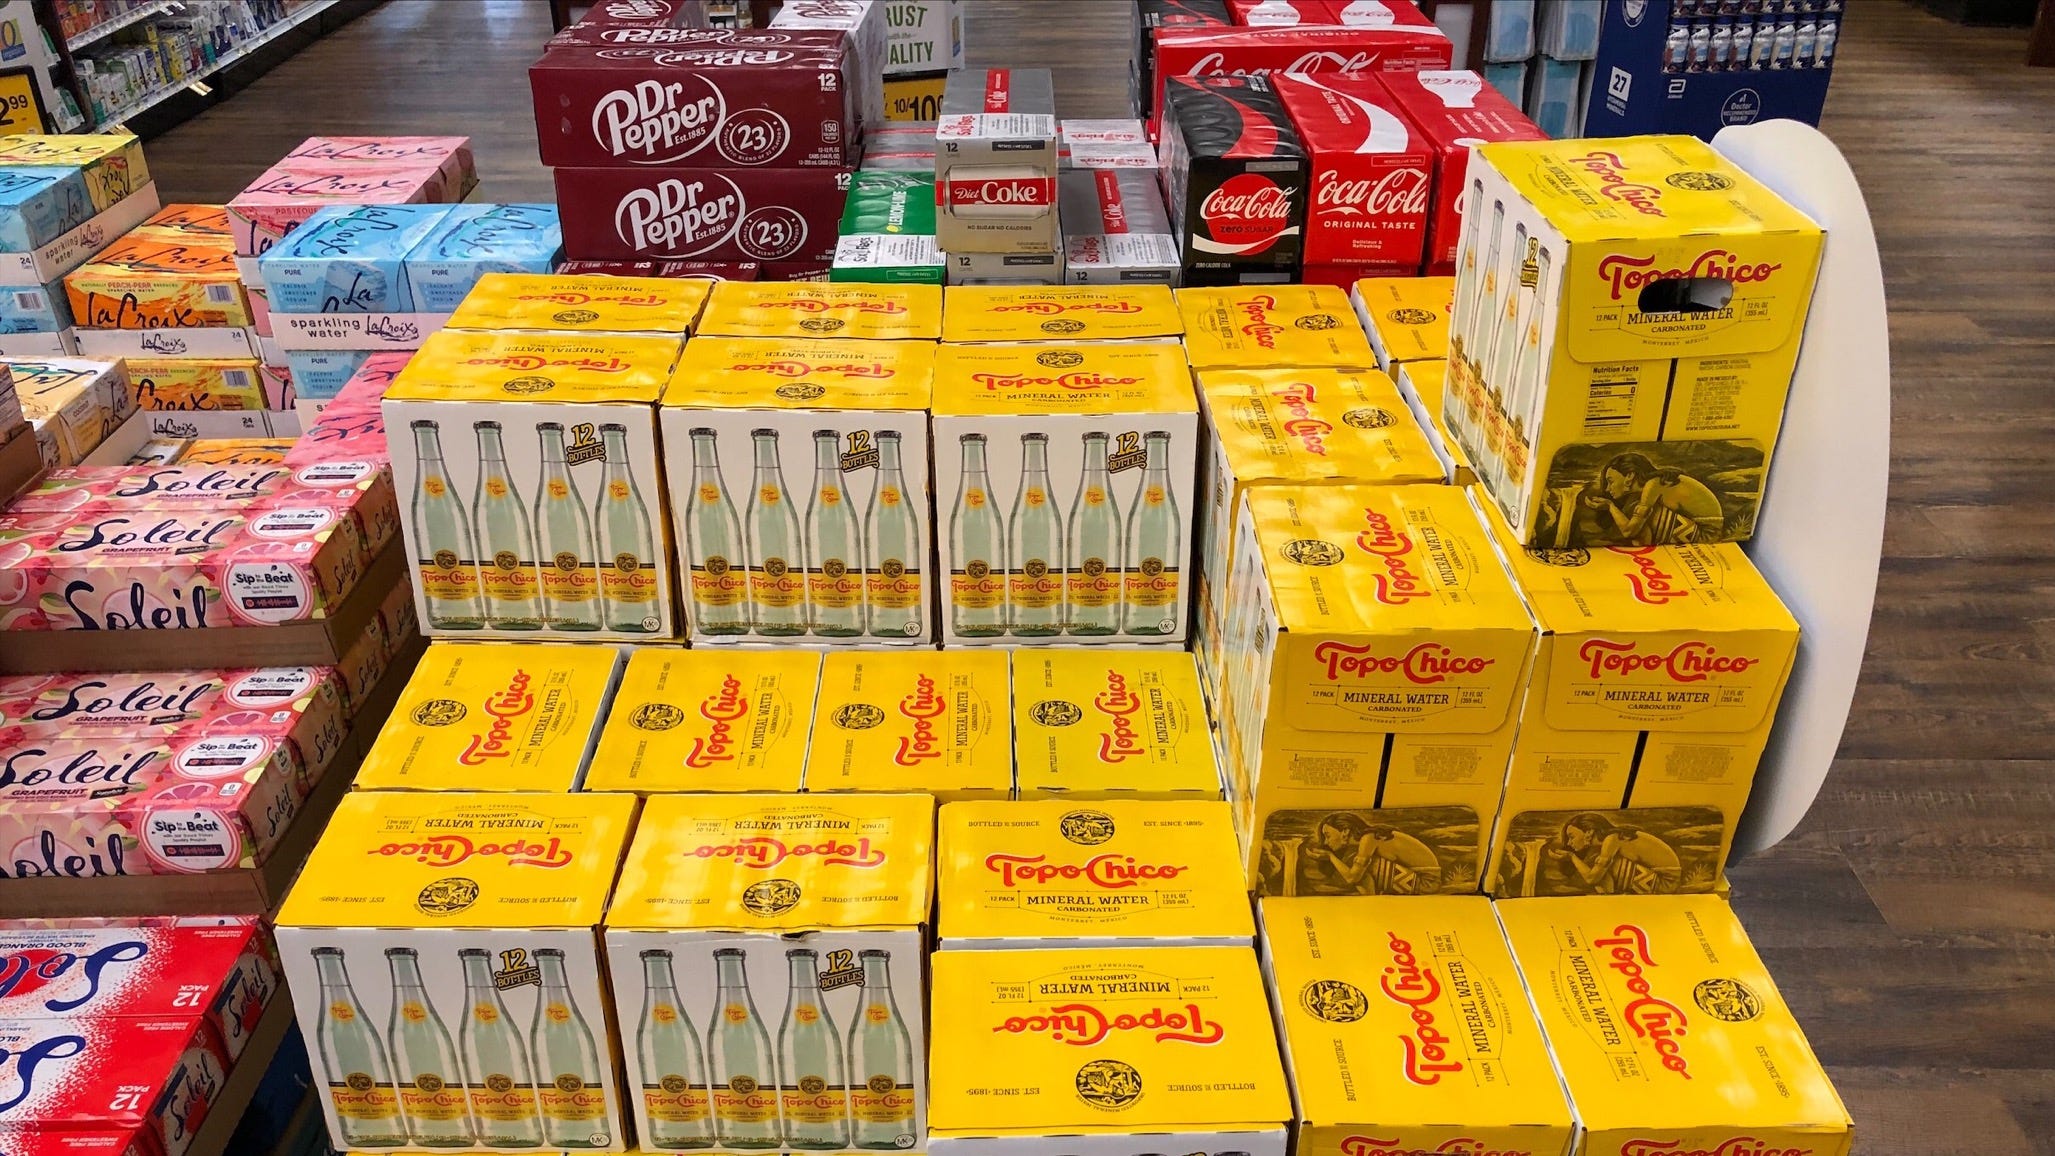 Is there a Topo Chico shortage in Texas? We asked the company